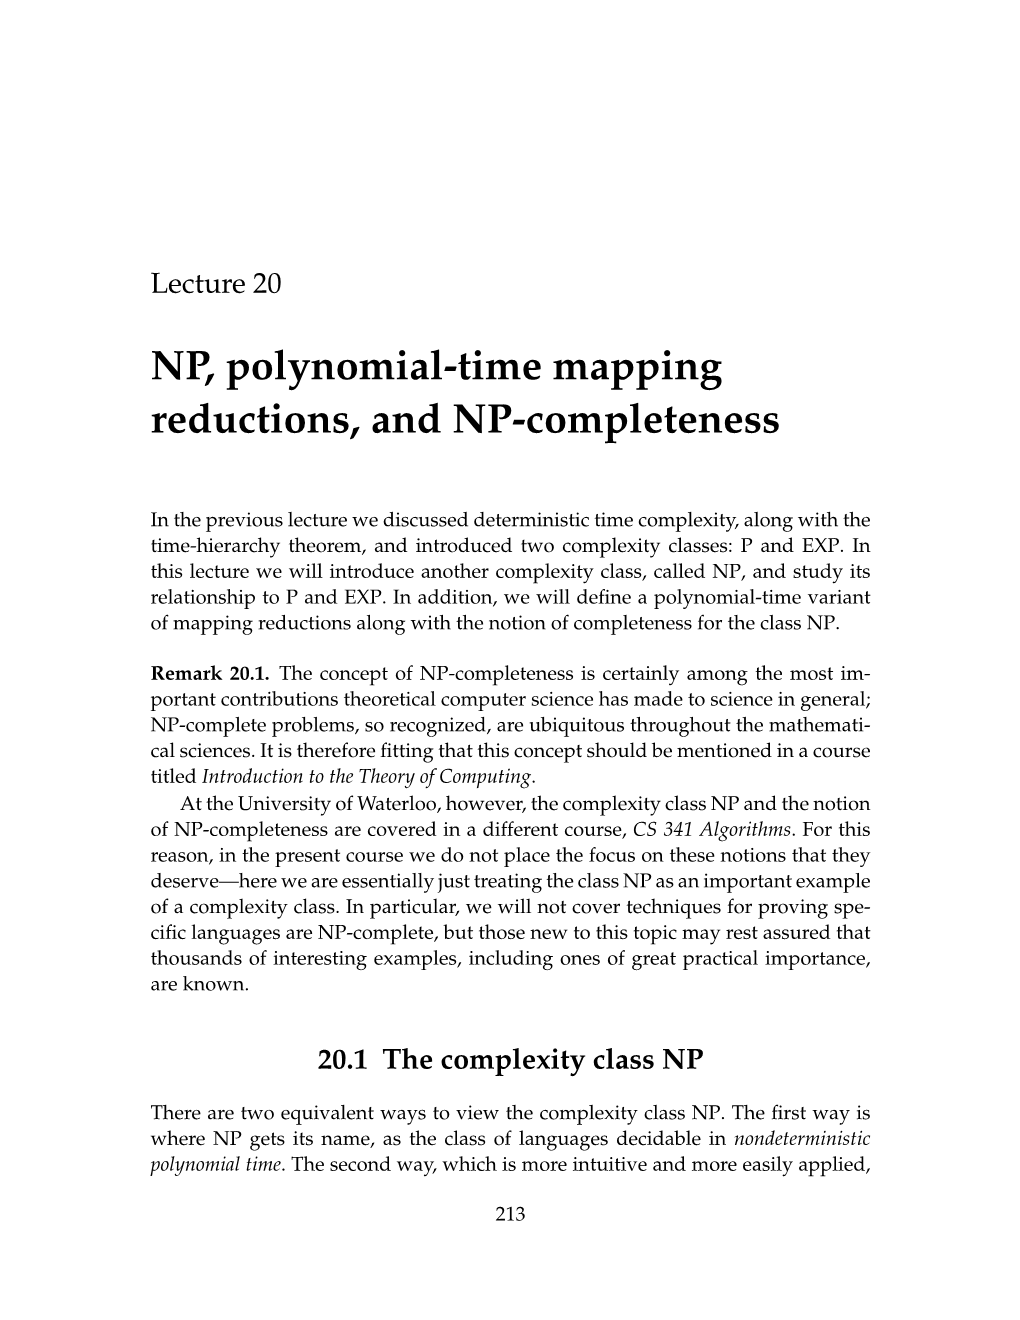 NP, Polynomial-Time Mapping Reductions, and NP-Completeness